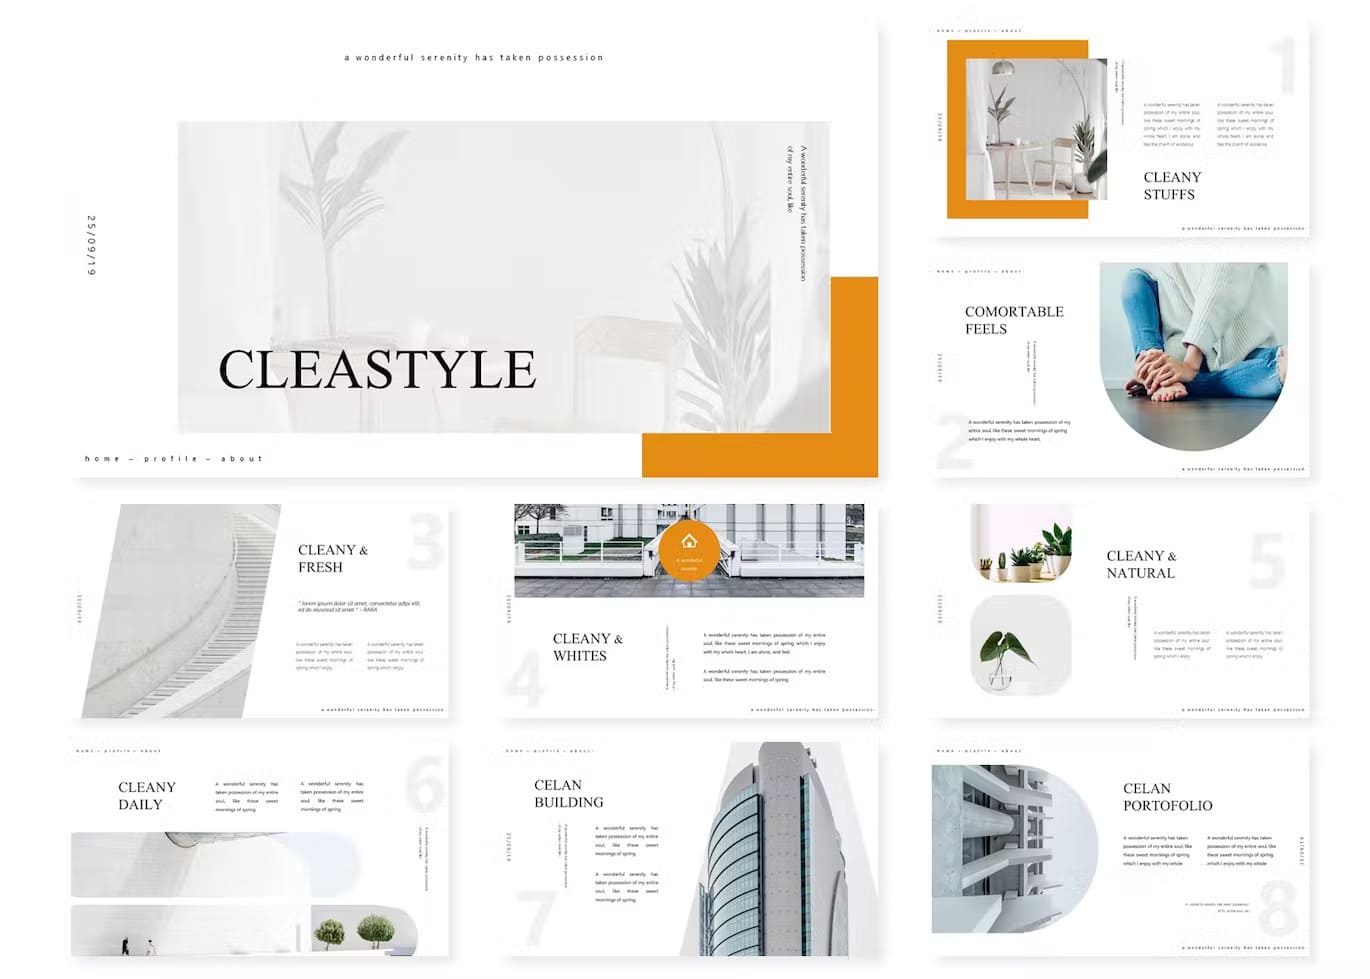 Cleastyle, Cleany & Fresh, Cleany Stuffs, Comfortable Feels.